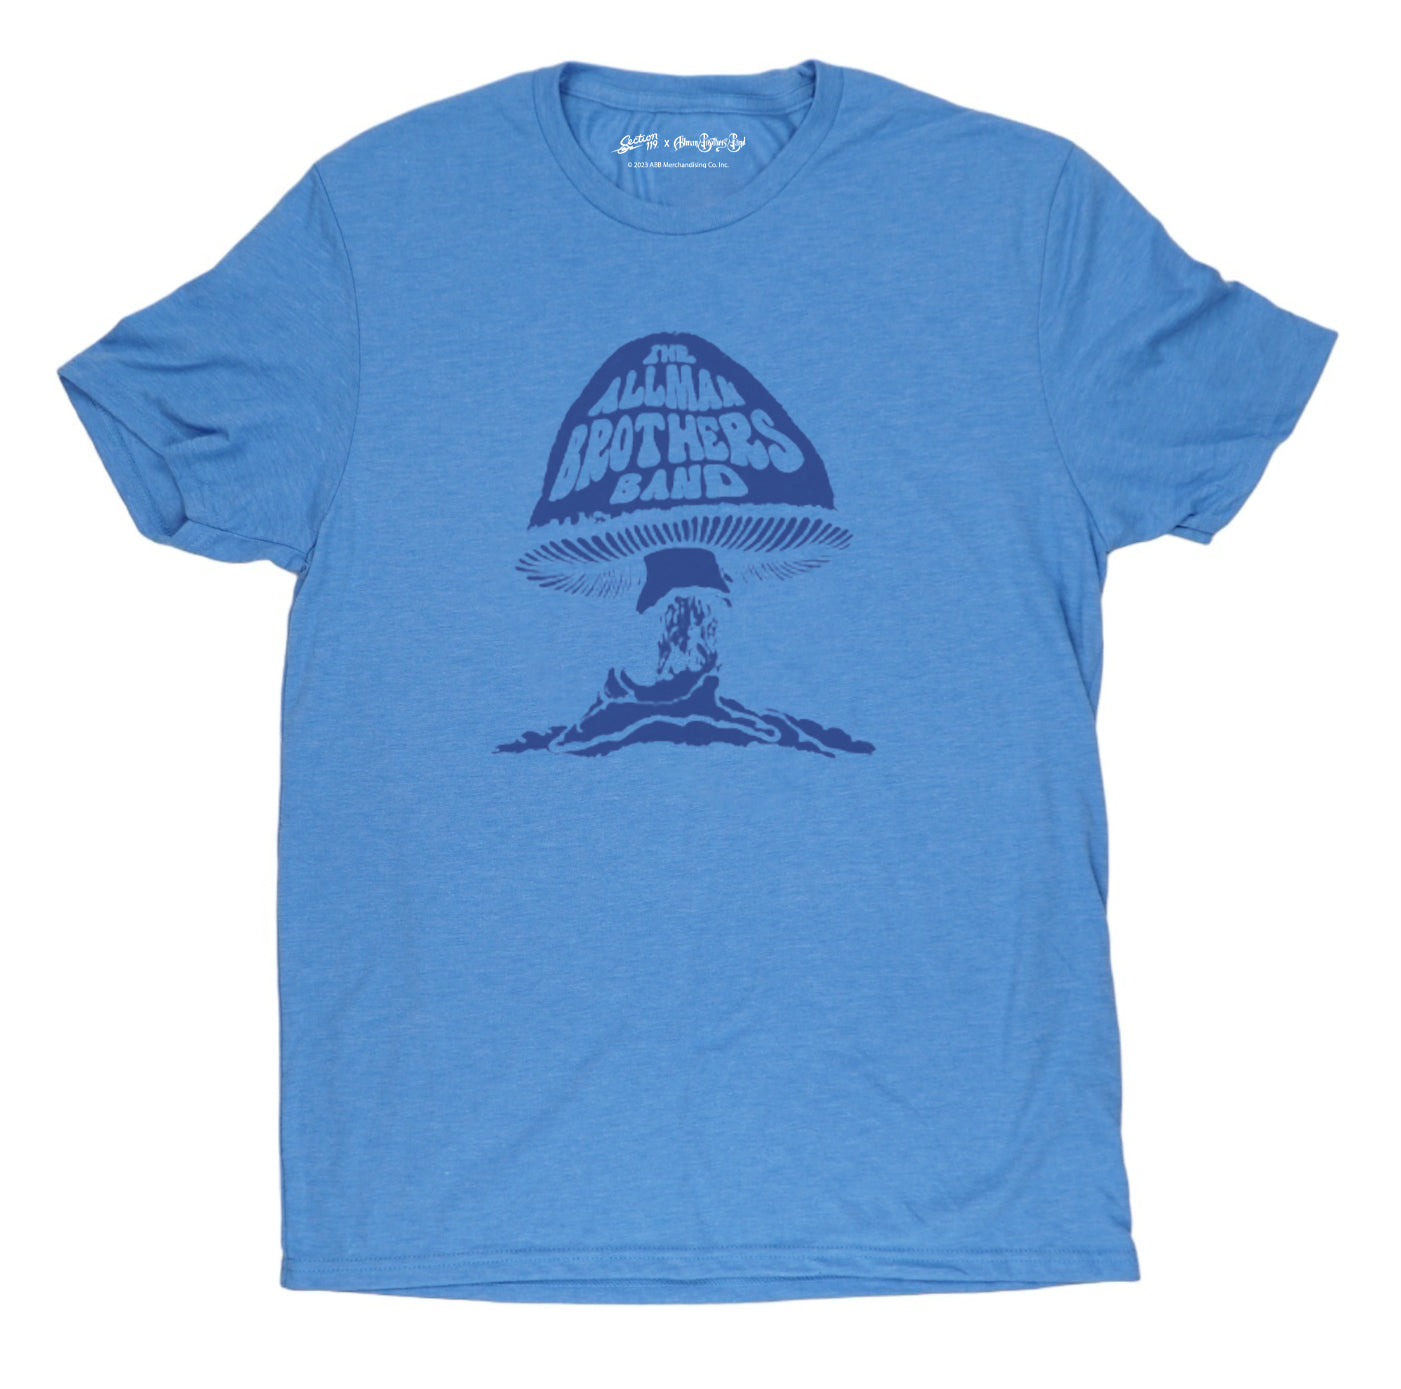 Allman Brothers Band  | Eco Friendly Tee | Blue Mushroom on Blue - Section 119